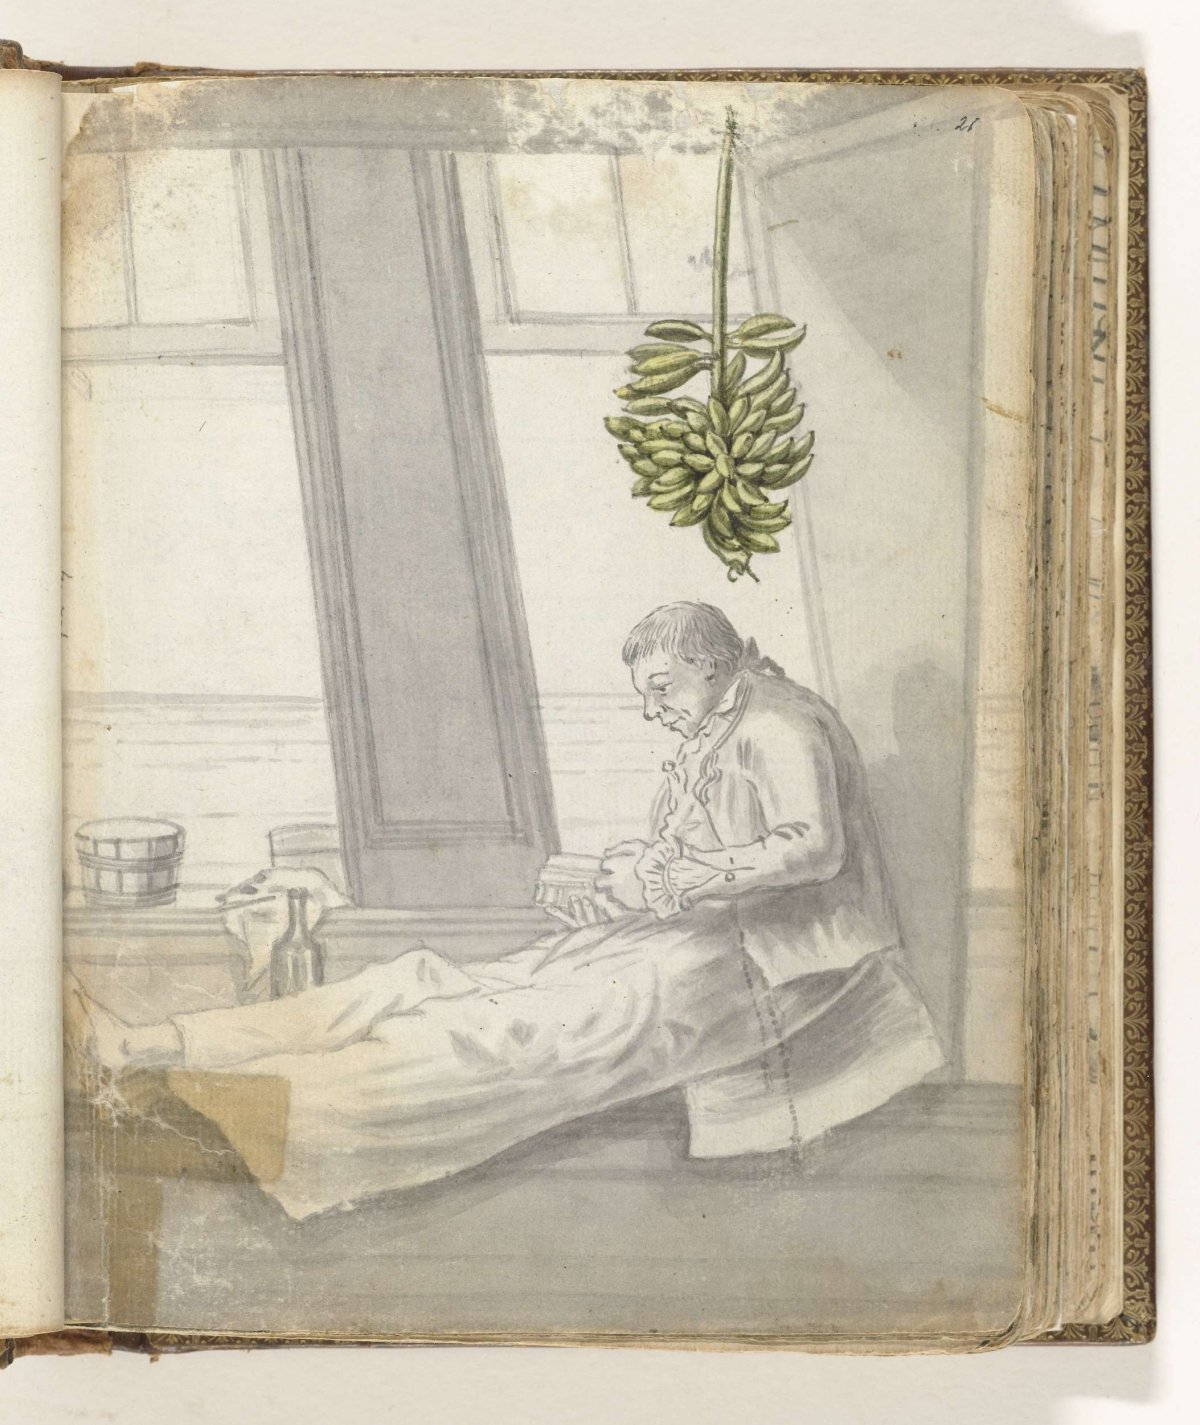 Man with book in front of window, Jan Brandes, 1785 - 1786